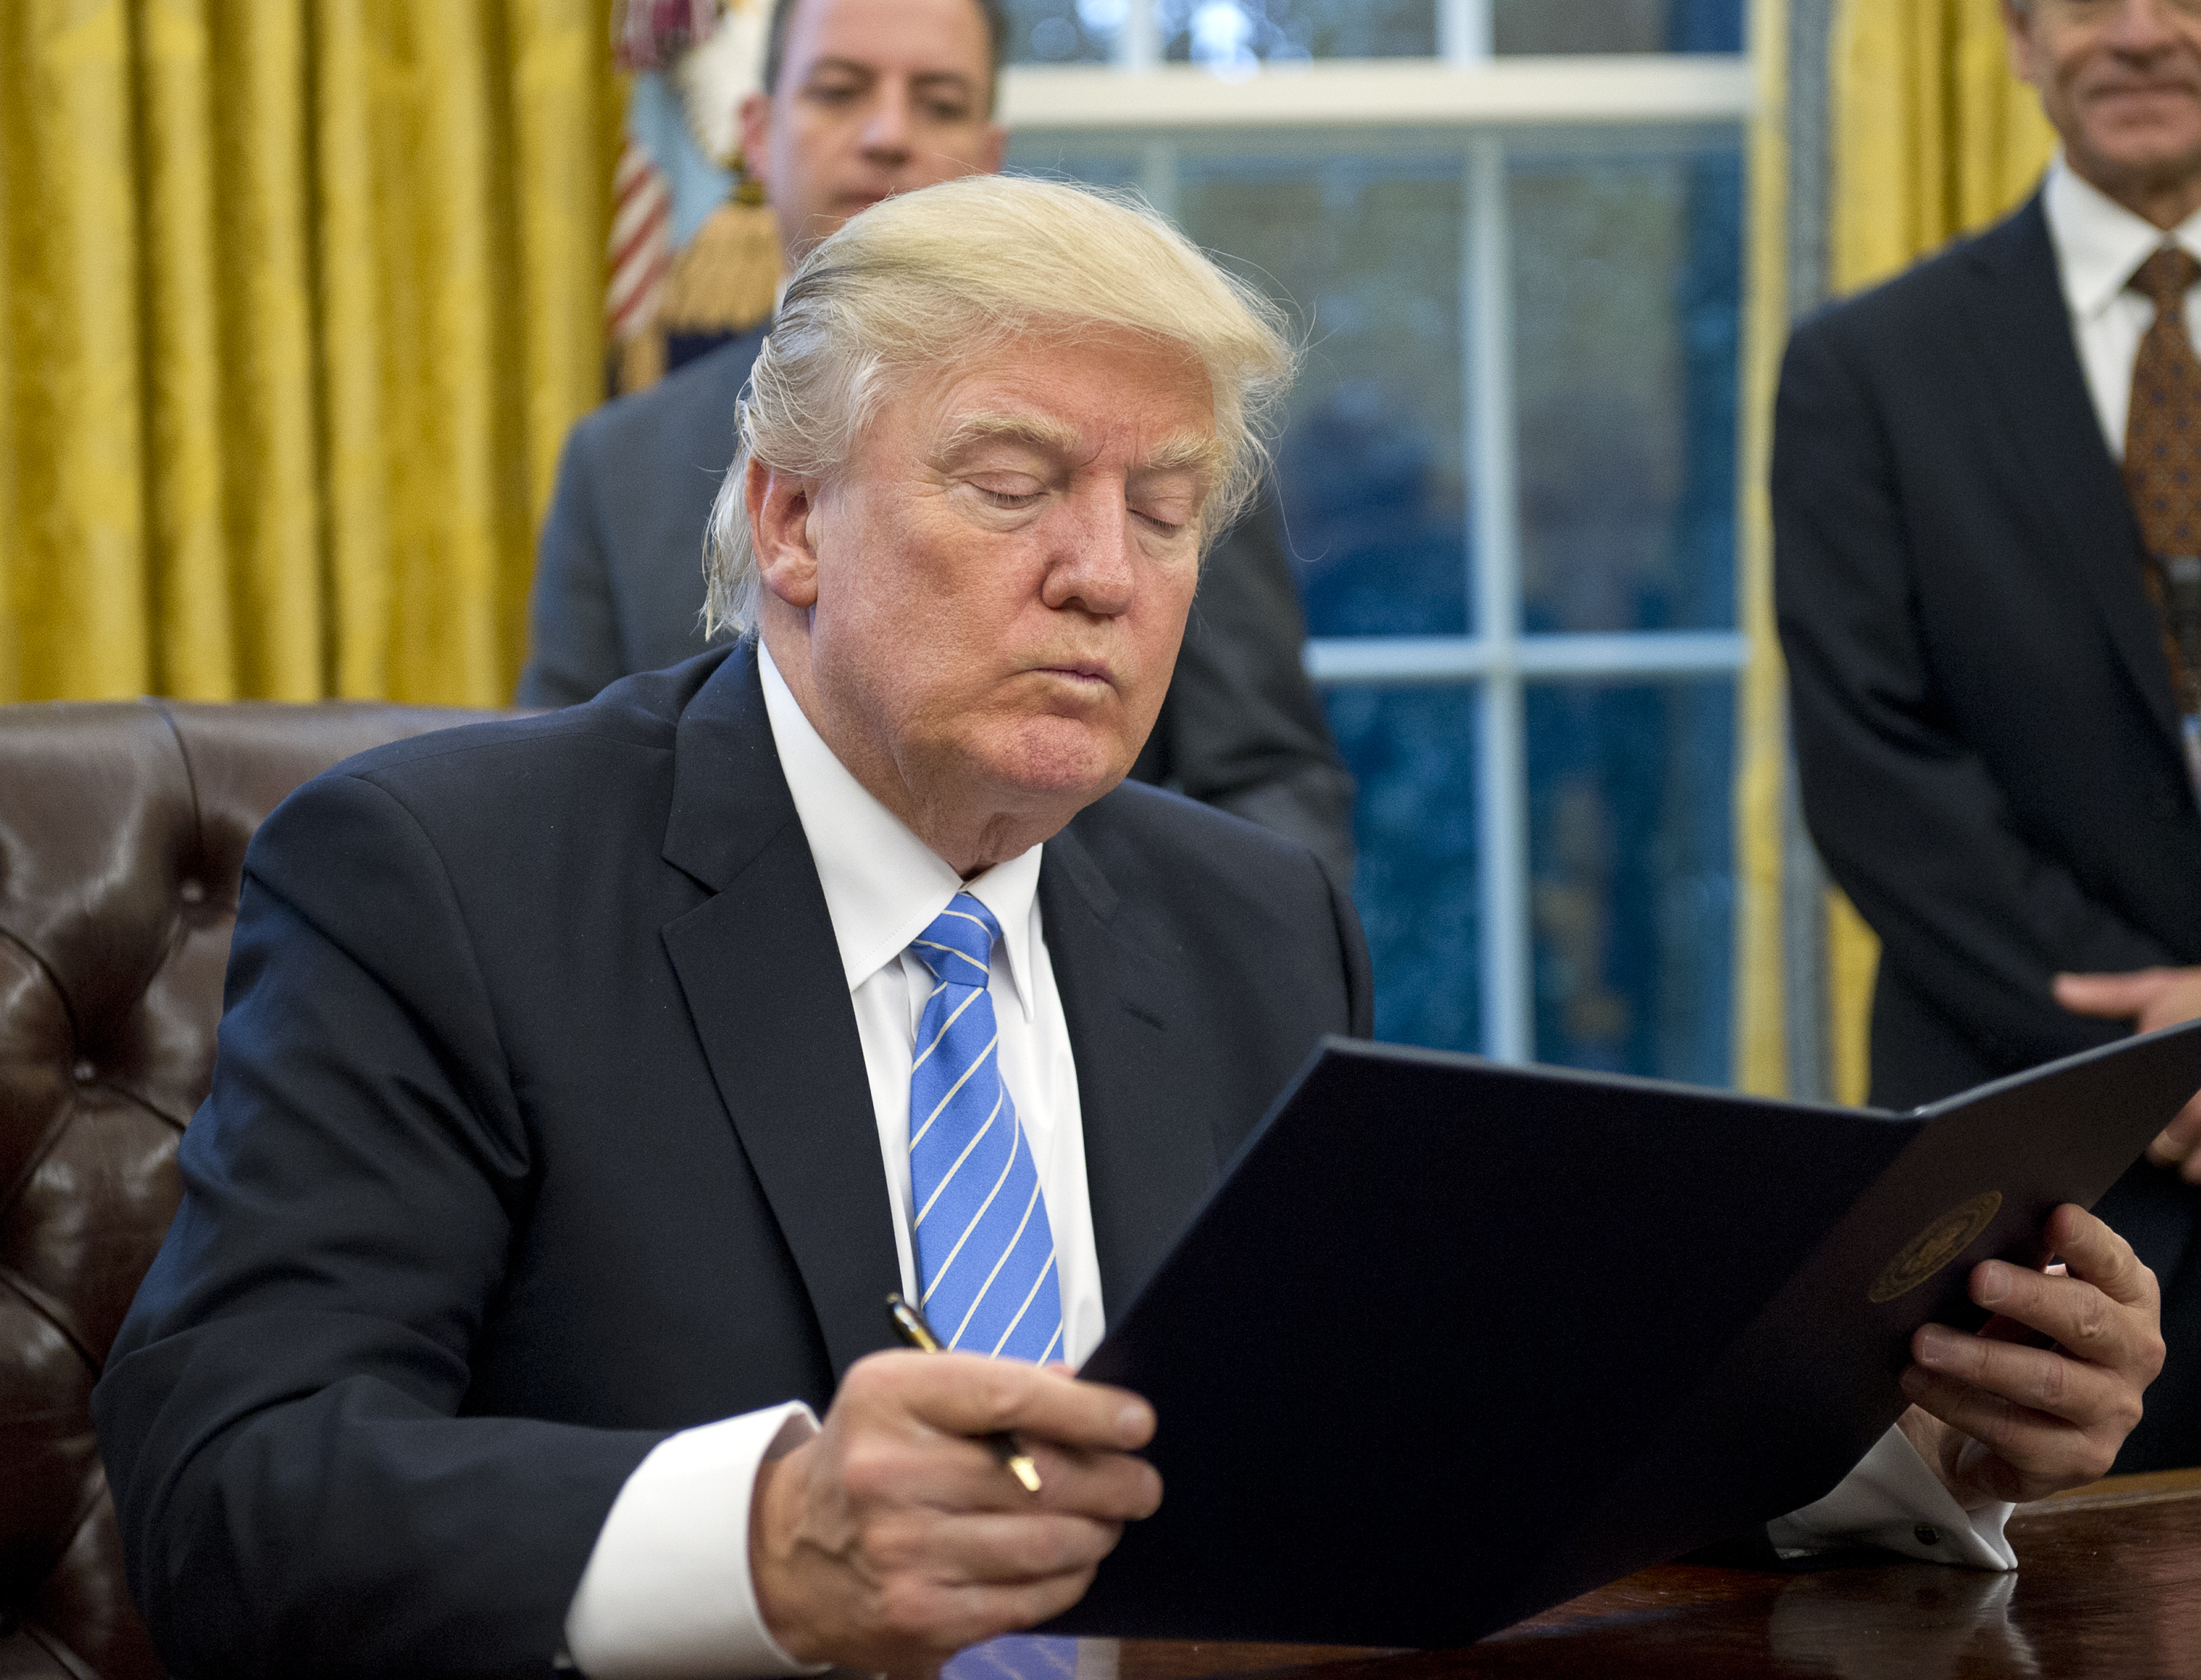 WASHINGTON, DC - JAN. 23: (AFP OUT) U.S. President Donald Trump reads the first of three Executive Orders he will sign in the Oval Office of the White House in Washington, DC on Monday, January 23, 2017.  This one concerned the withdrawal of the United States from the Trans-Pacific Partnership (TPP).  The others will be a US Government hiring freeze for all departments but the military, and "Mexico City" which bans federal funding of abortions overseas. (Pool—Getty Images)